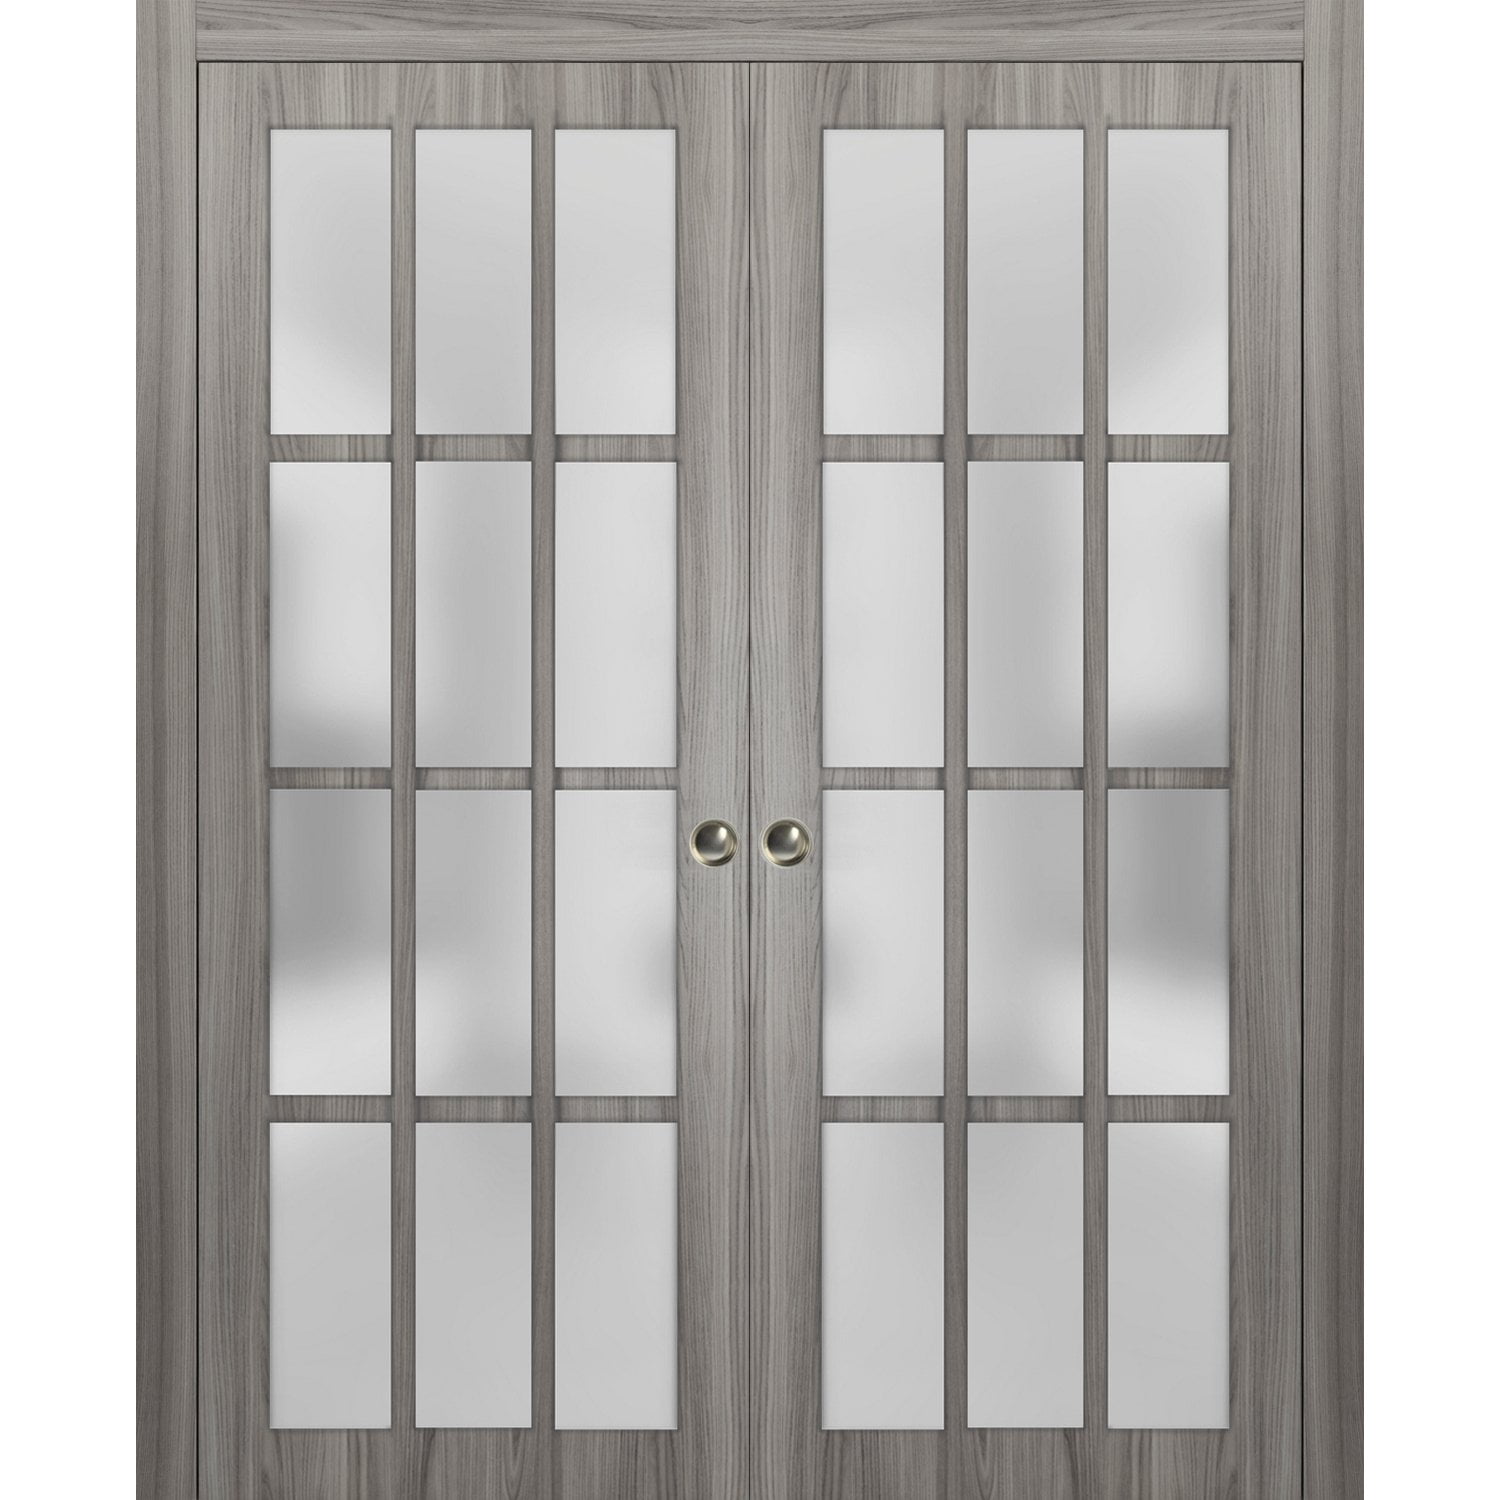 Sliding French Double Pocket Doors 56 x 80 inches Frosted Glass 12 ...